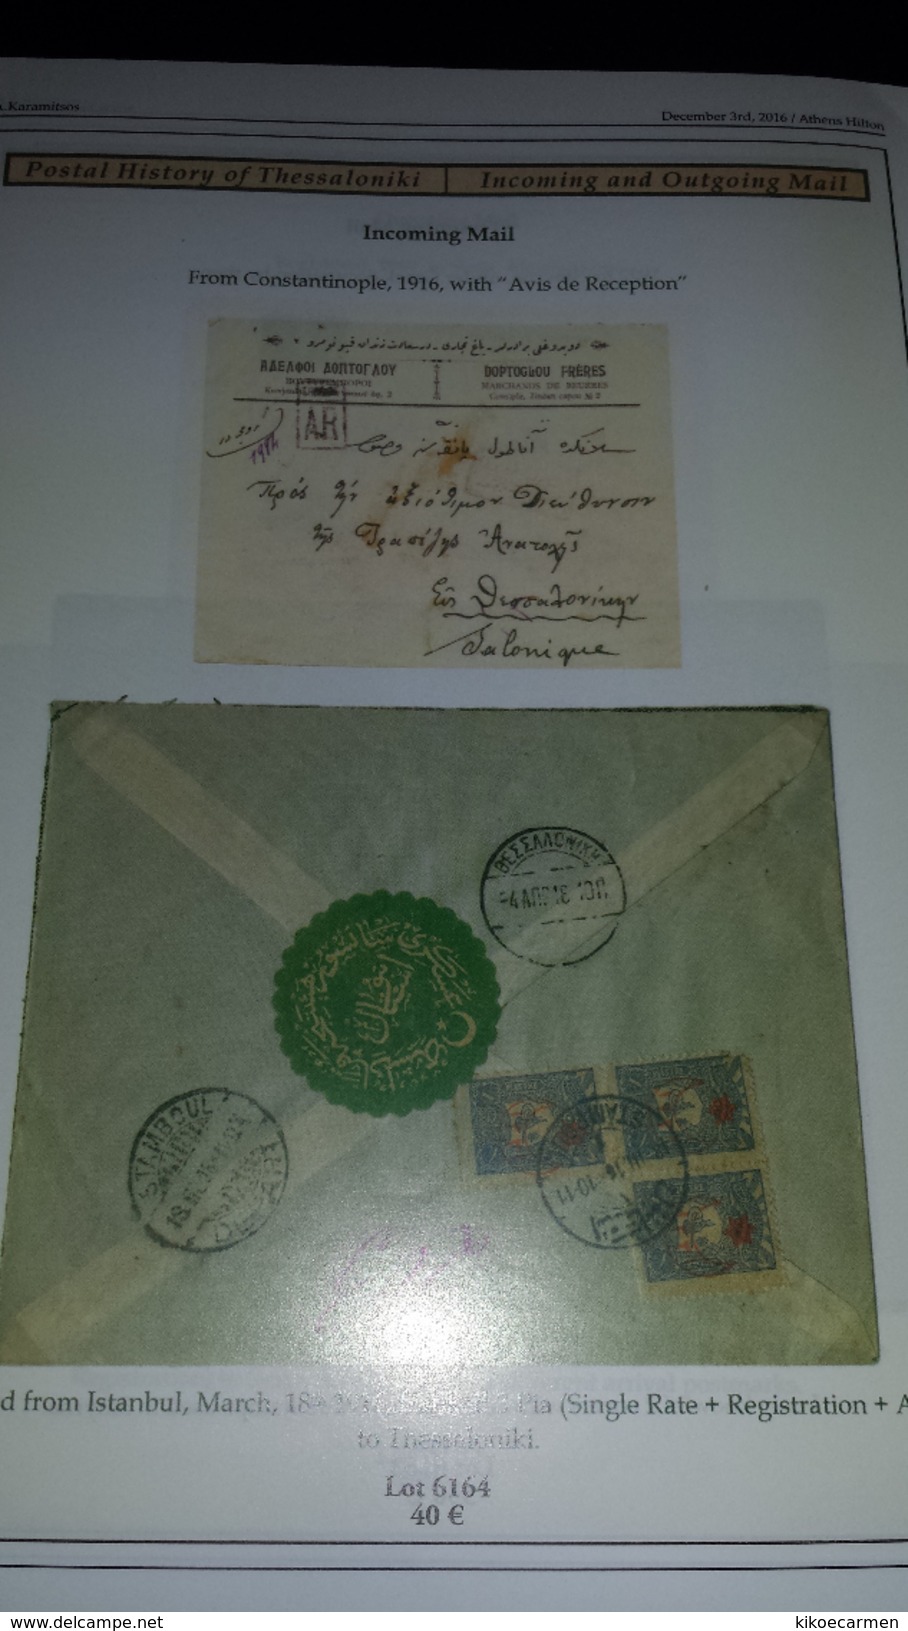 GREEK POSTAL HISTORY OF THESSALONIKI INCOMING AND OUTCOMING MAIL Greece Hellas 118colored pages  of THOMAREIS Collection